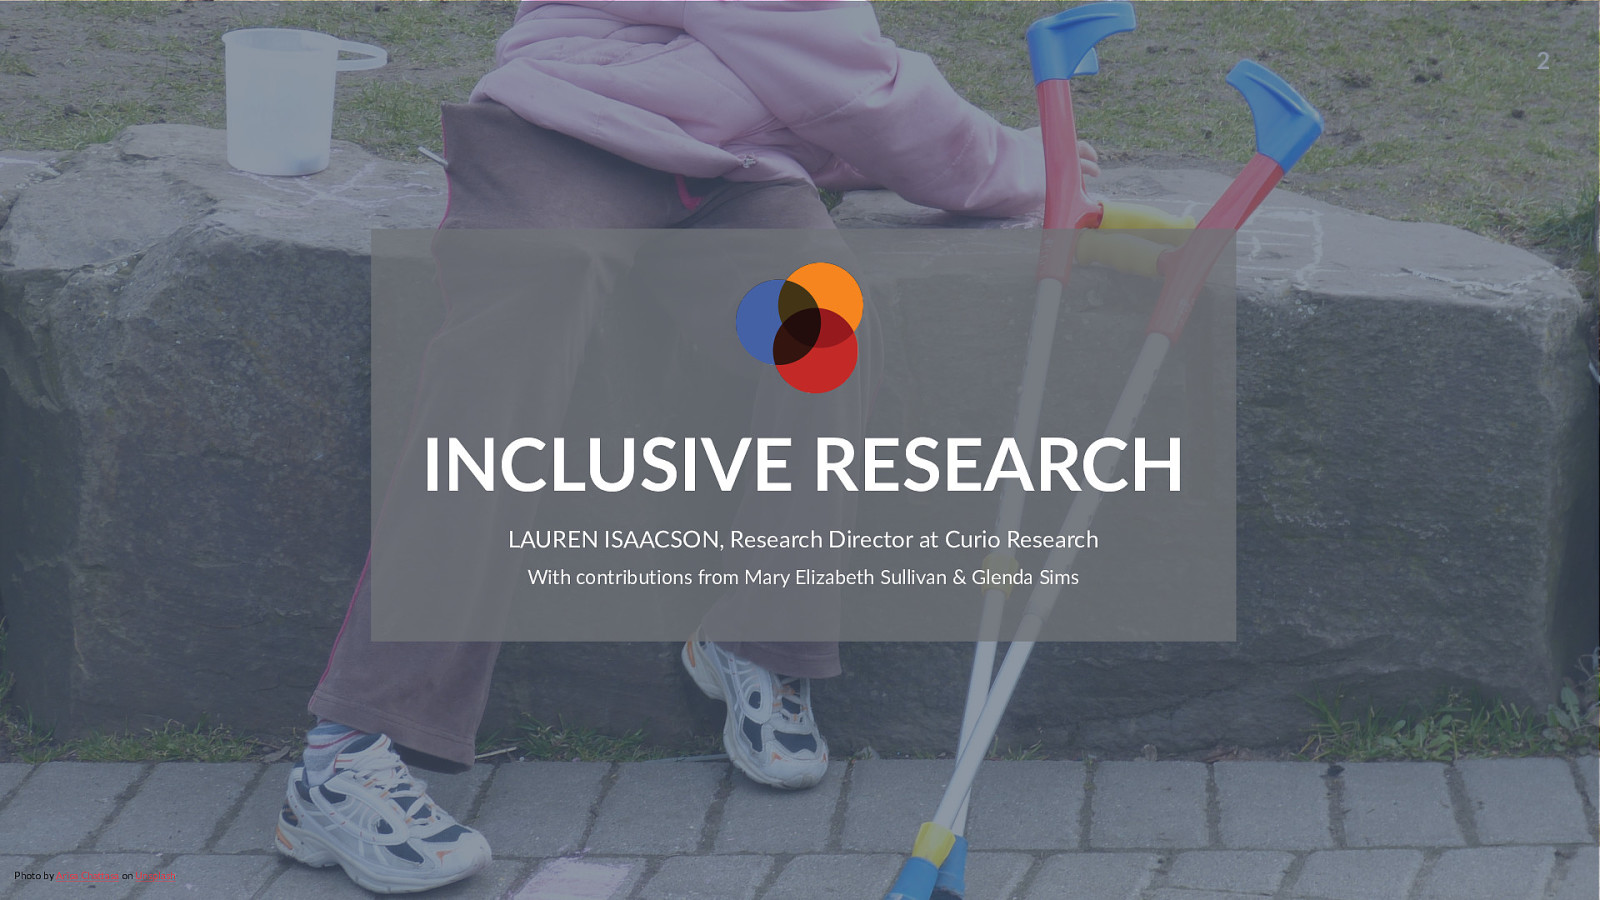 Inclusive Research: Making research accessible to people with disabilities